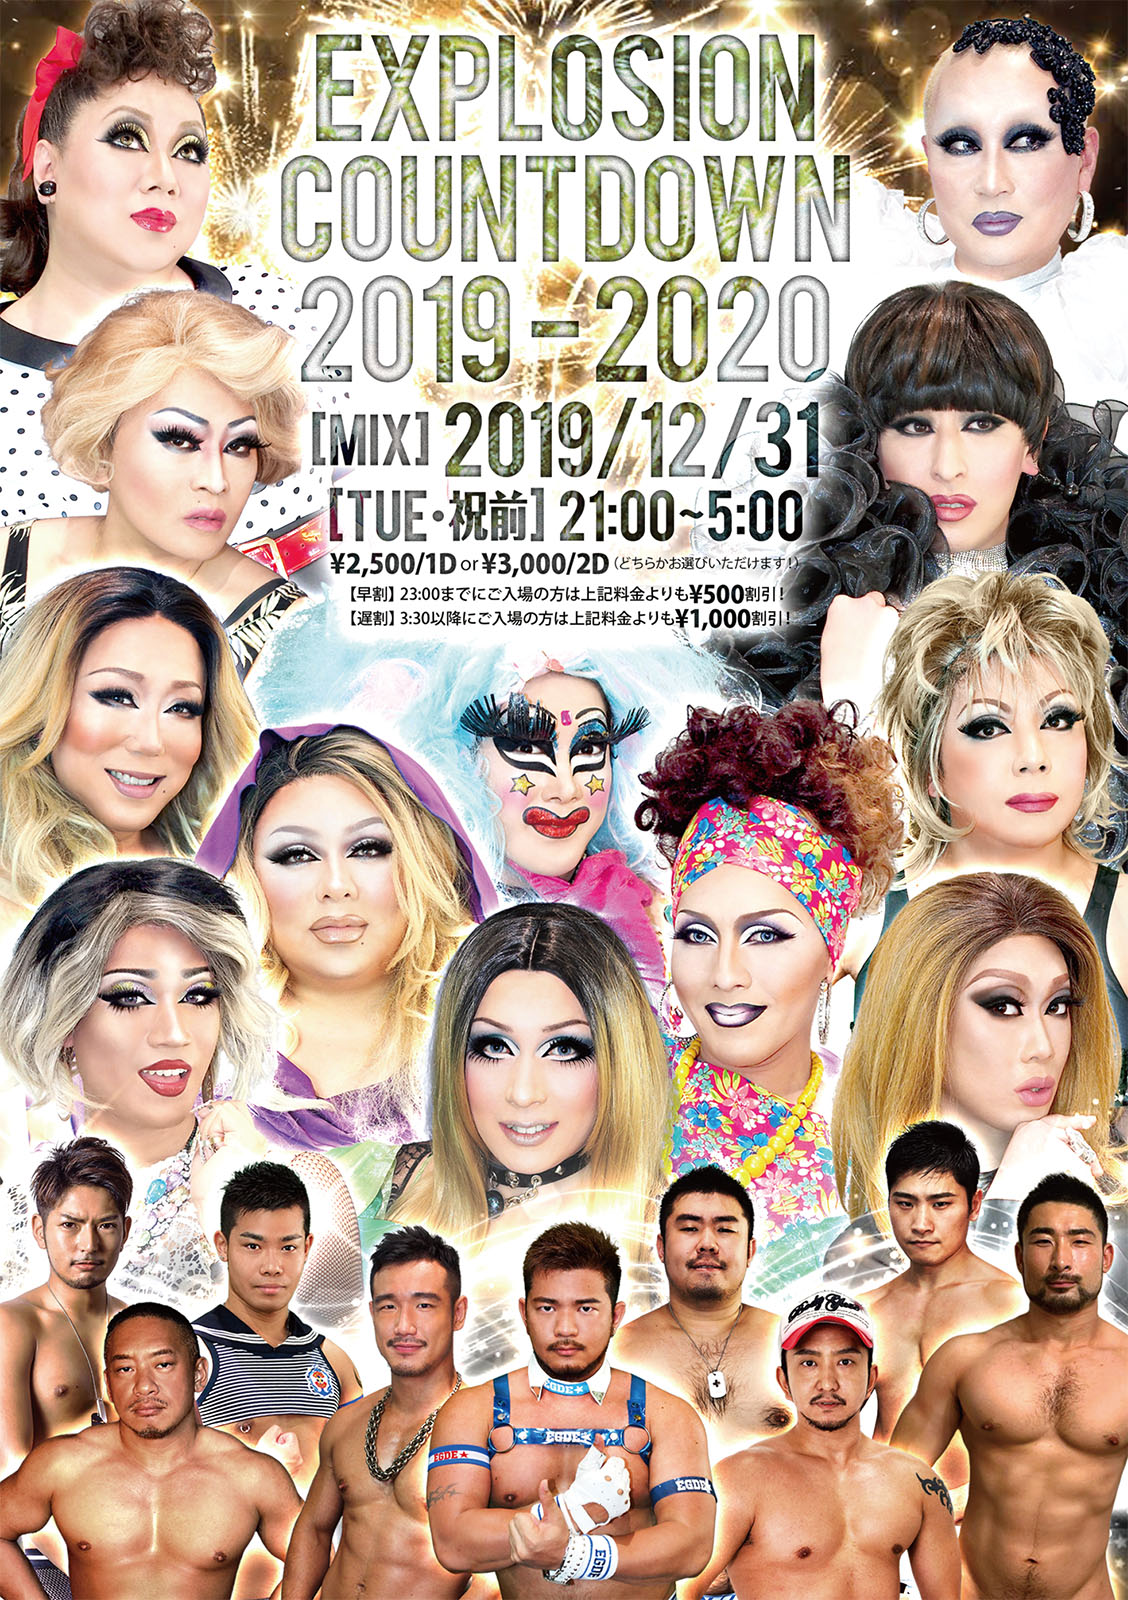 12/31(TUE・祝前) 21:00～5:00 EXPLOSION COUNTDOWN 2019-2020 ＜MIX＞